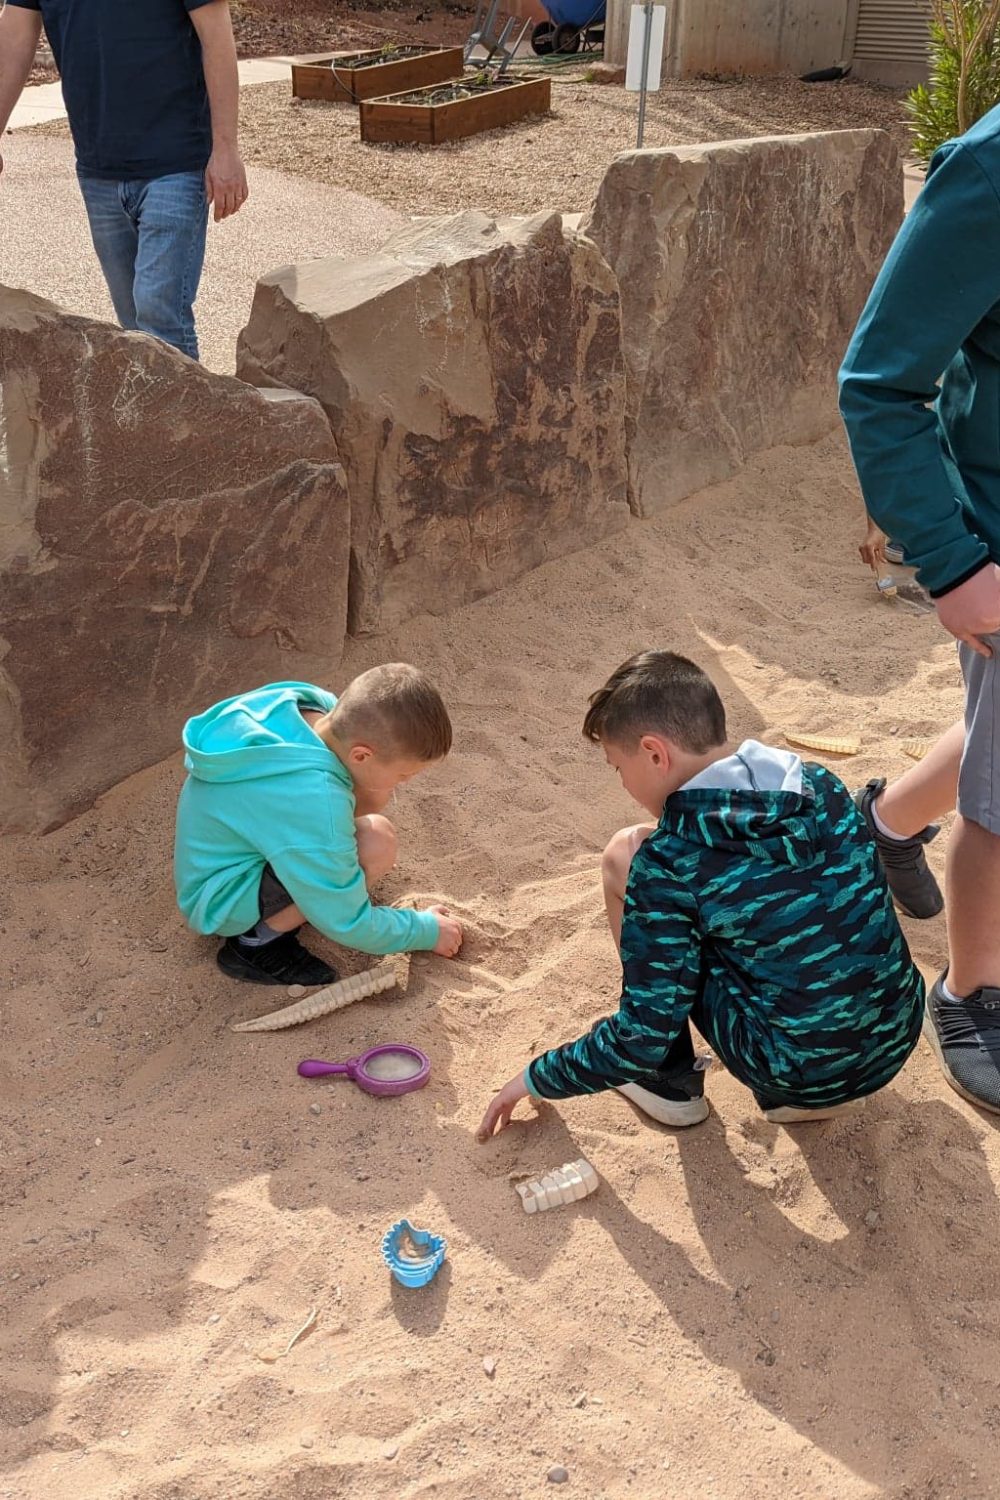 Kids searching for fossils at the St. George Dinosaur Discovery site.